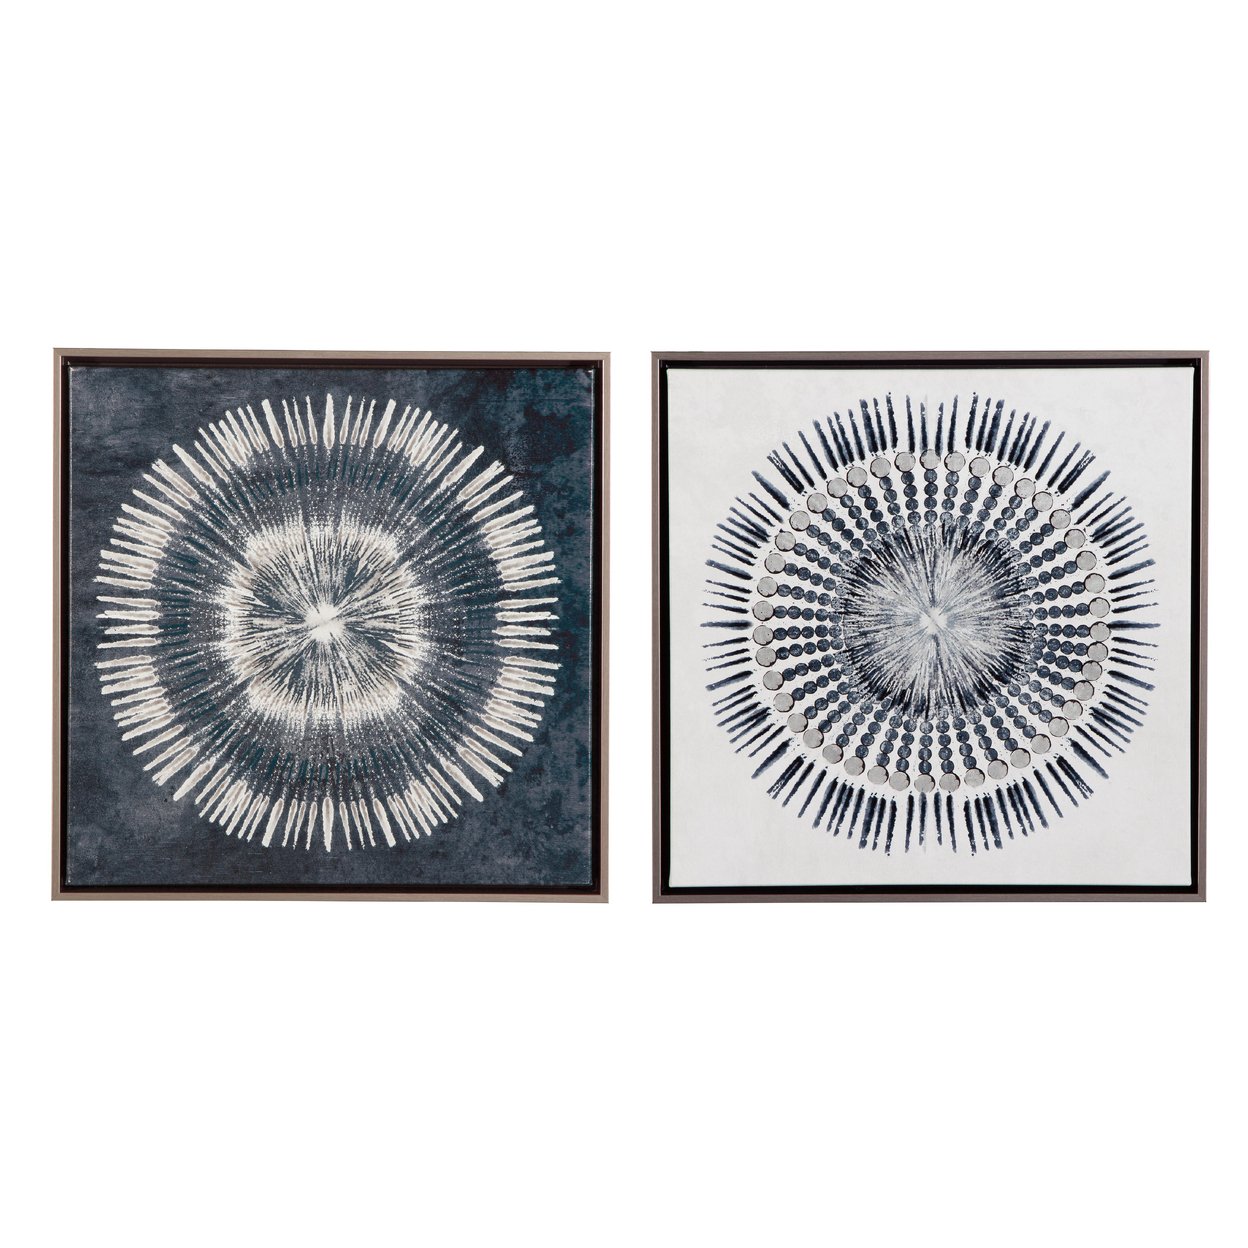 Gallery Canvas Wall Art With Circular Orientation, Set Of 2, Blue And White- Saltoro Sherpi